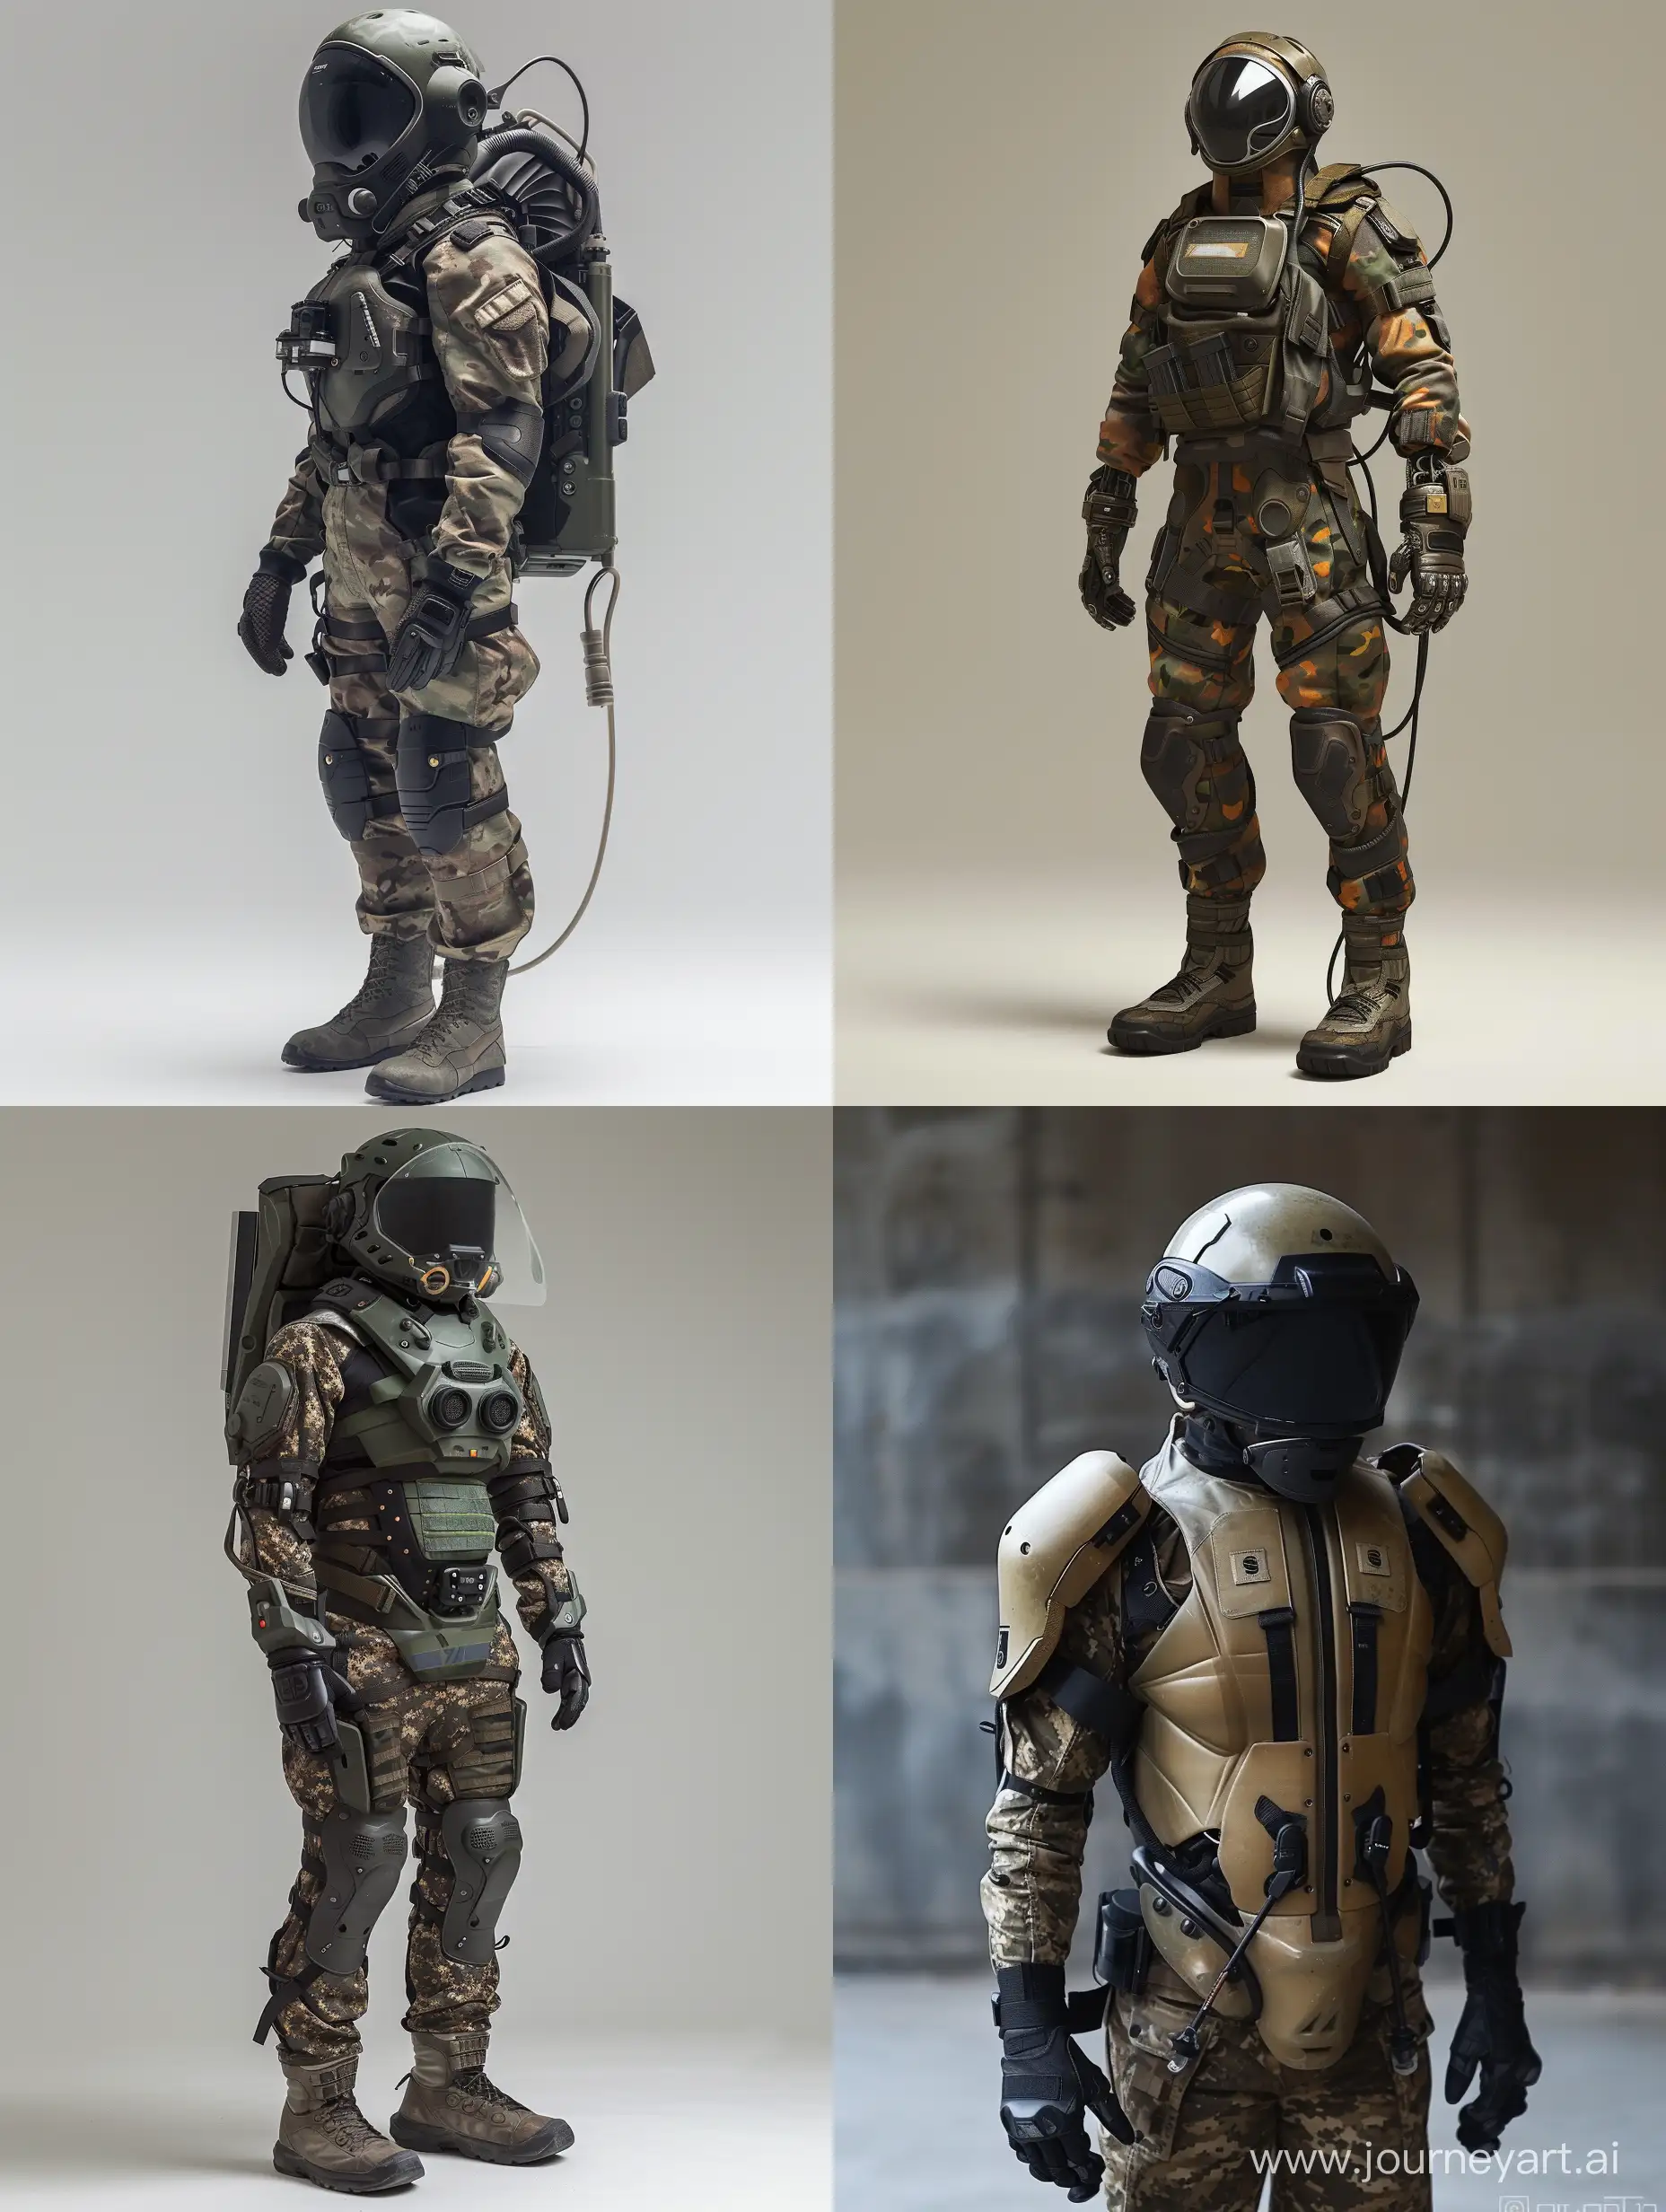 Futurism, Cyberpunk, Retro, Militarism, Army, Cybernetics, Futuristic Combat Protective Gear, Exoskeleton, Power Armor, Full Body Protection, Olive Camouflage, Futuristic Tactical Helmet, Closed Face, Visor, Respirator, Futuristic Body Armor, Power Gloves, Power Boots